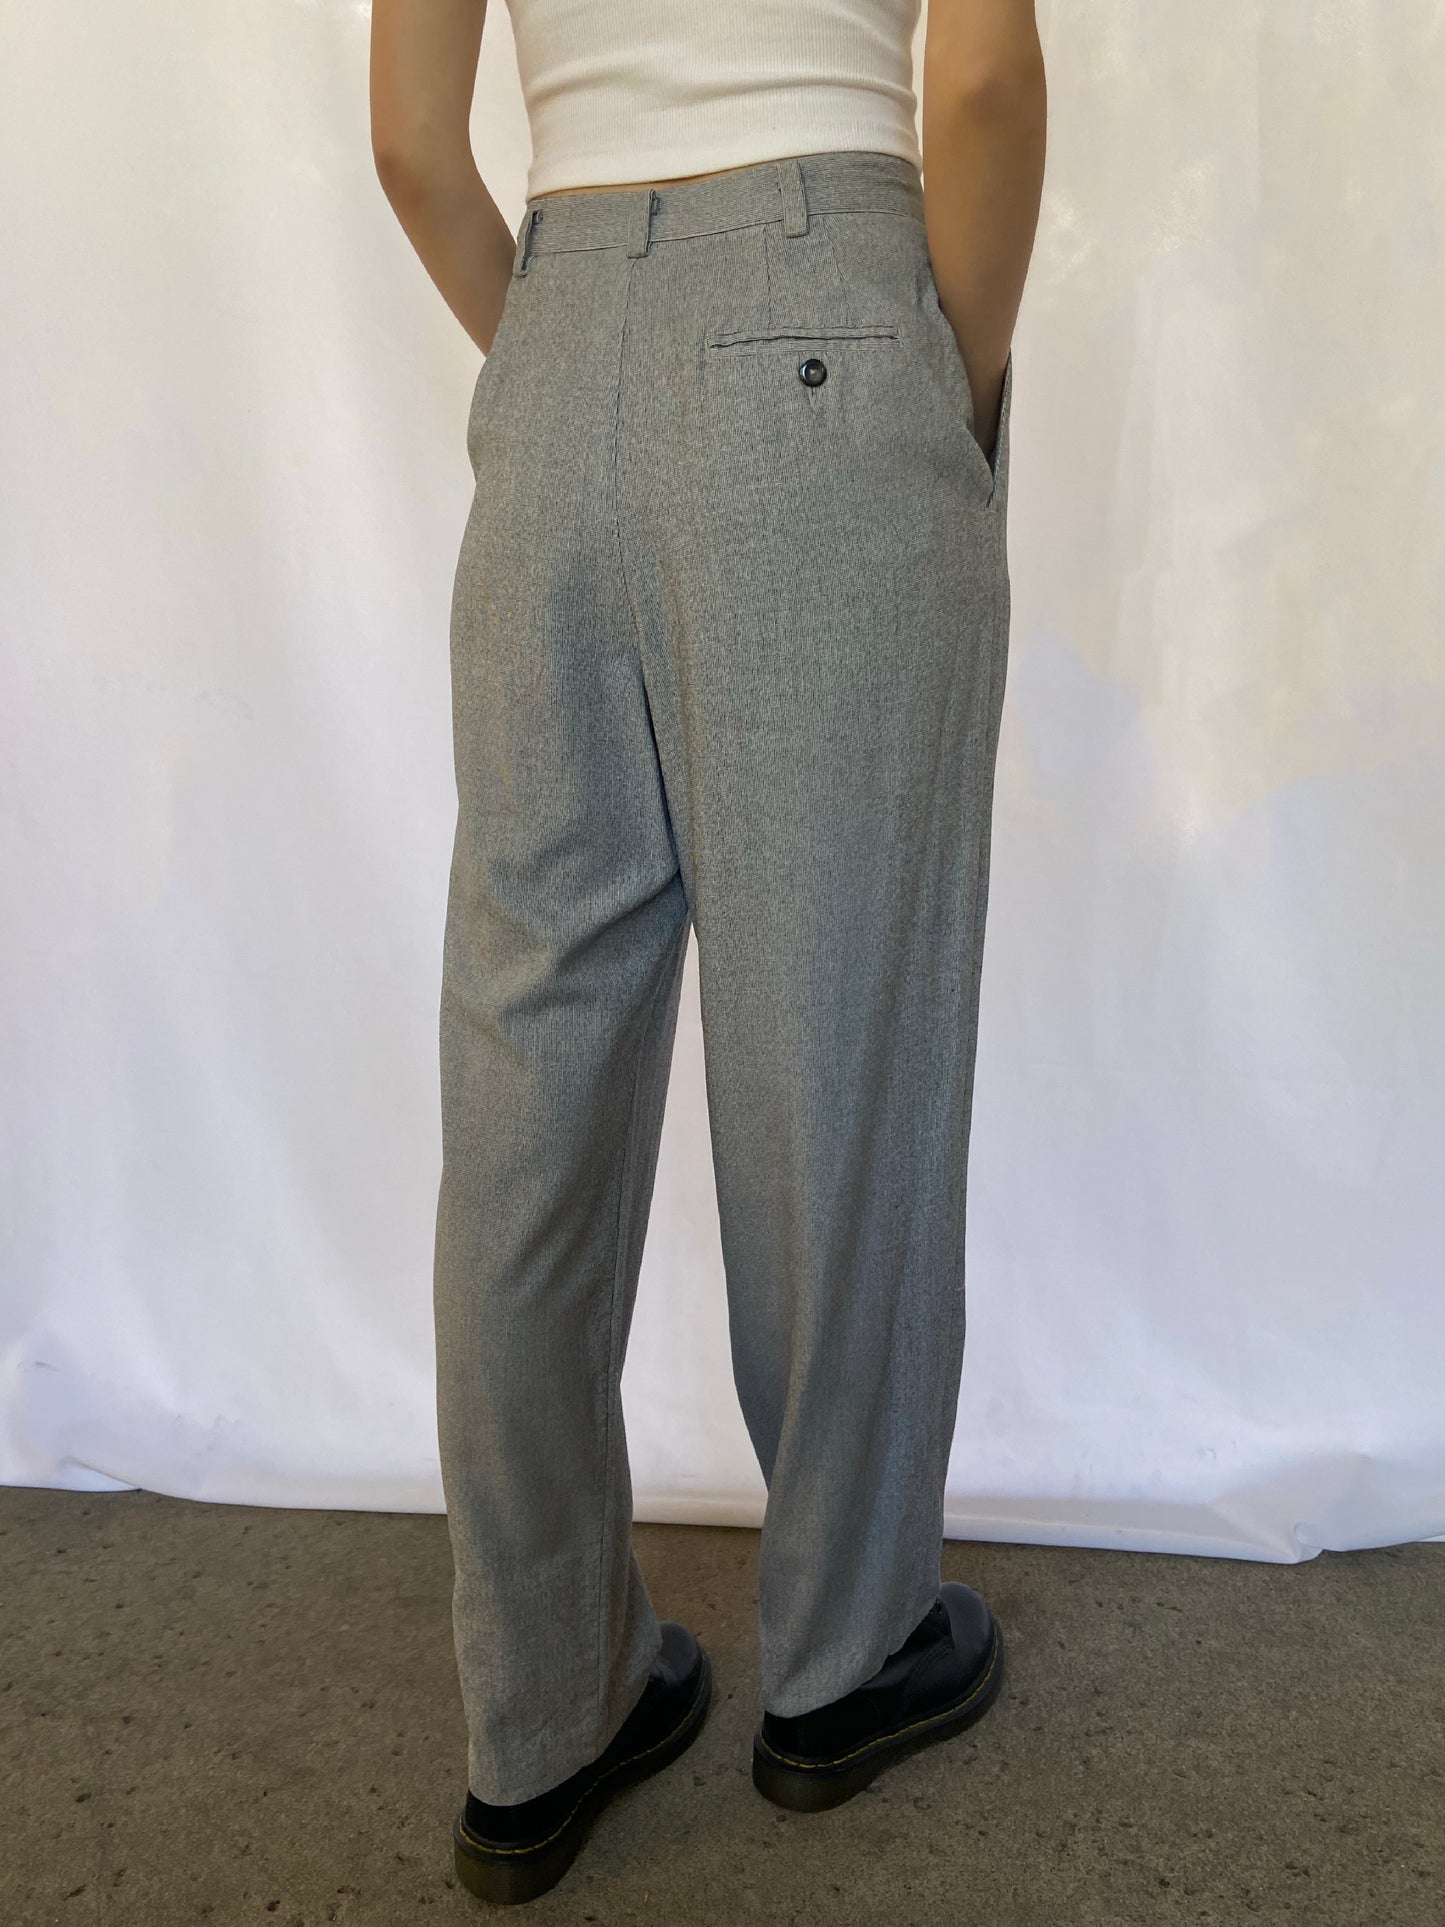 Grey Trousers - 26"